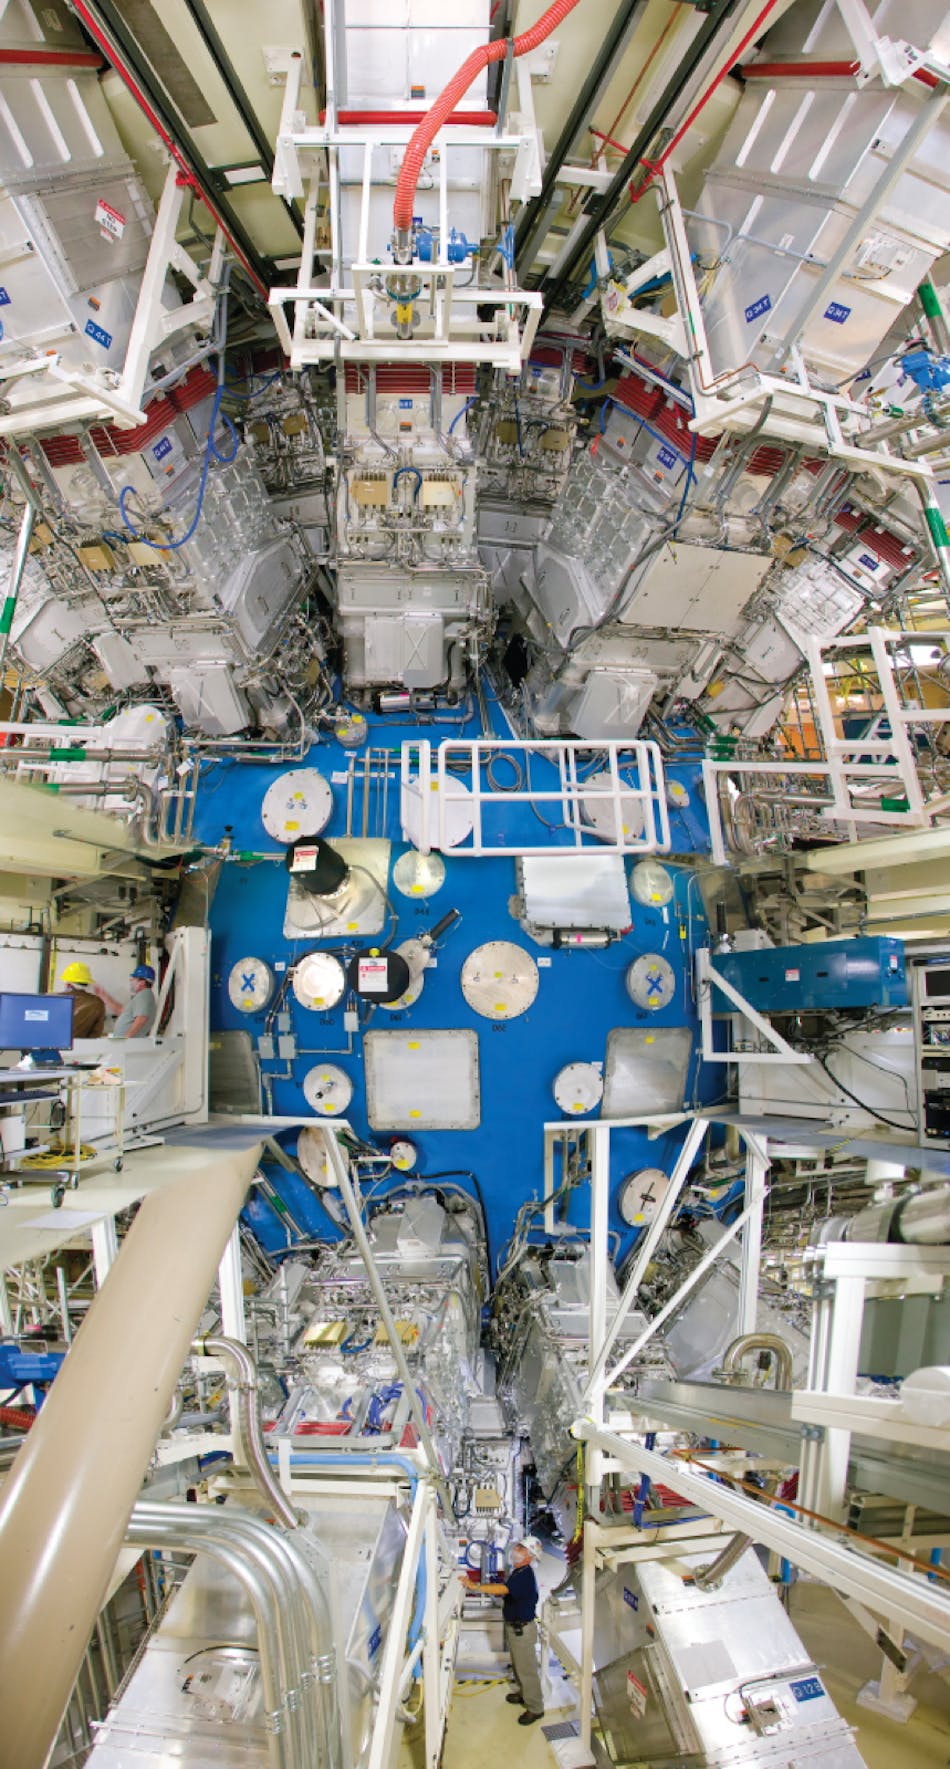 FIGURE 1. The Lawrence Livermore National Laboratory (LLNL) National Ignition Facility (NIF) target chamber; for scale, note worker in yellow helmet at left middle of photo.